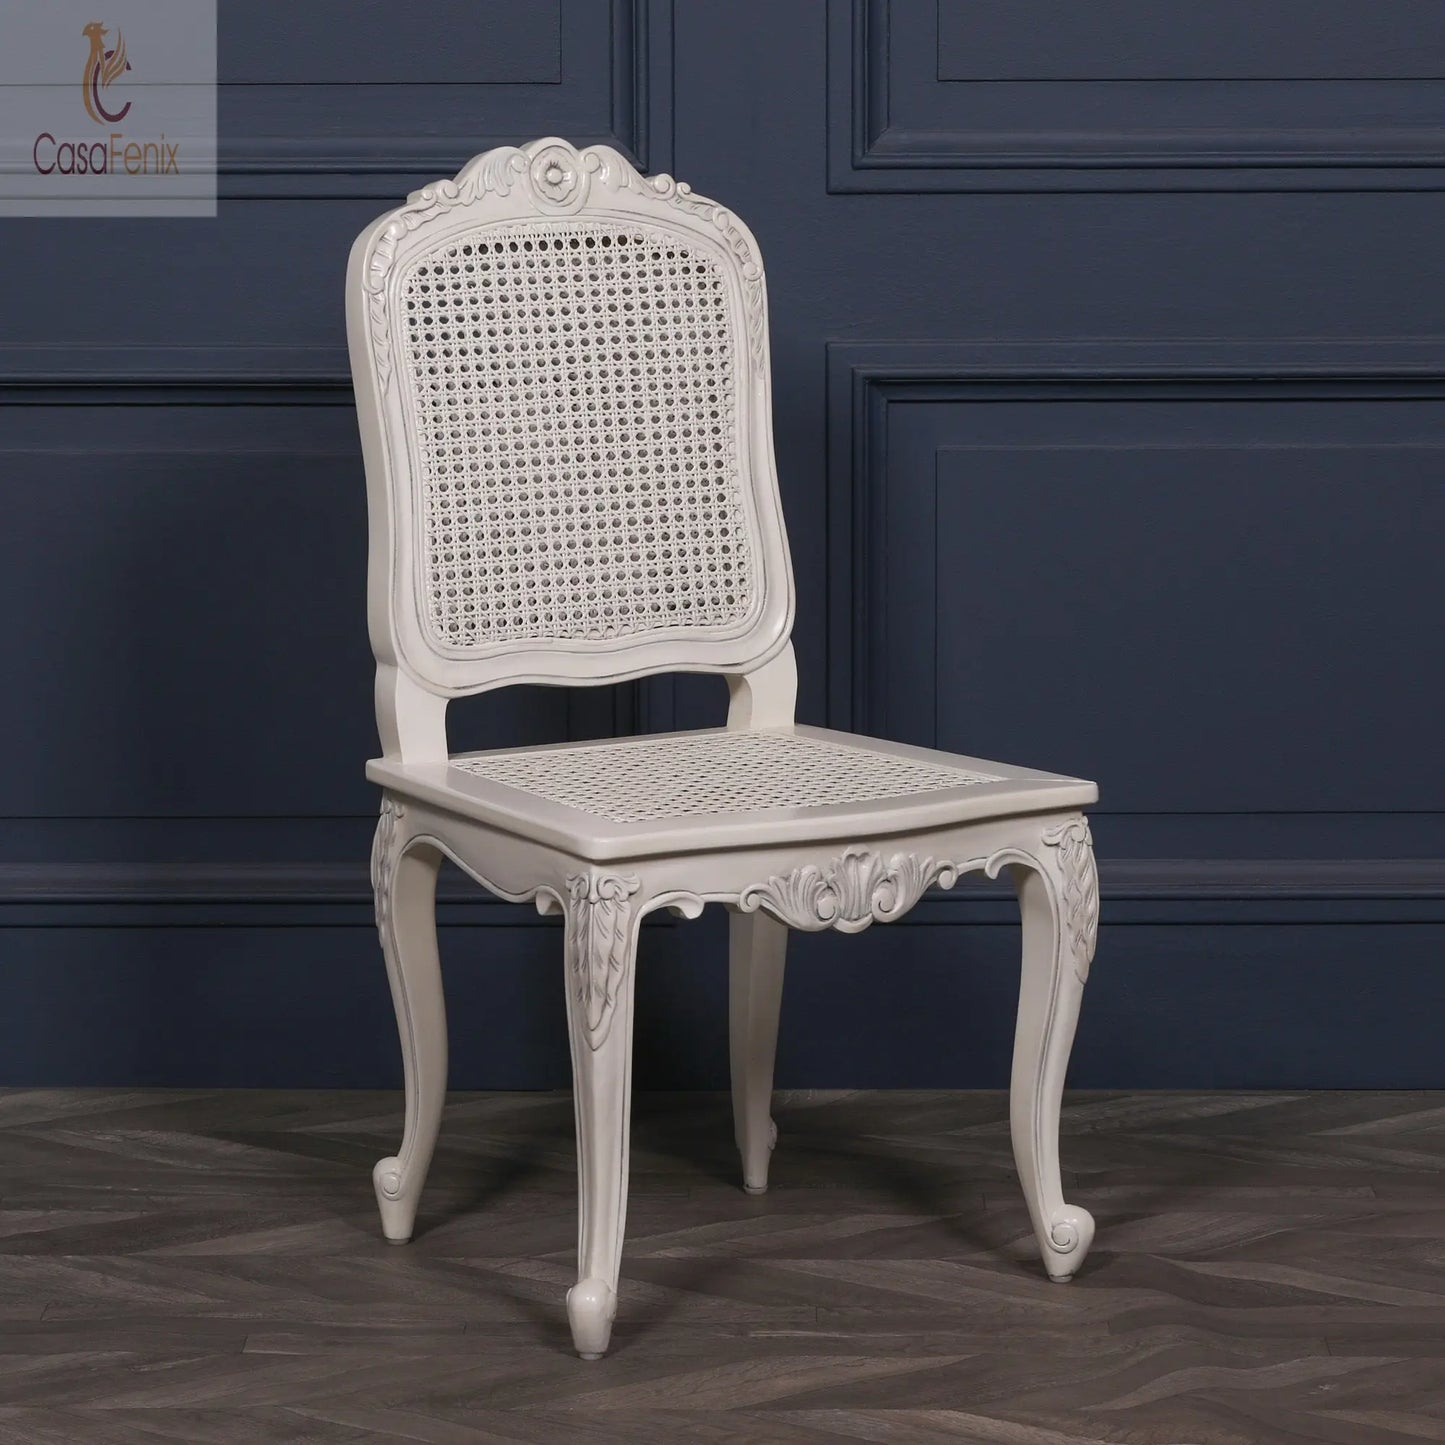 Off White Rattan Dining / Bedroom Chair Mahogany Wood - CasaFenix